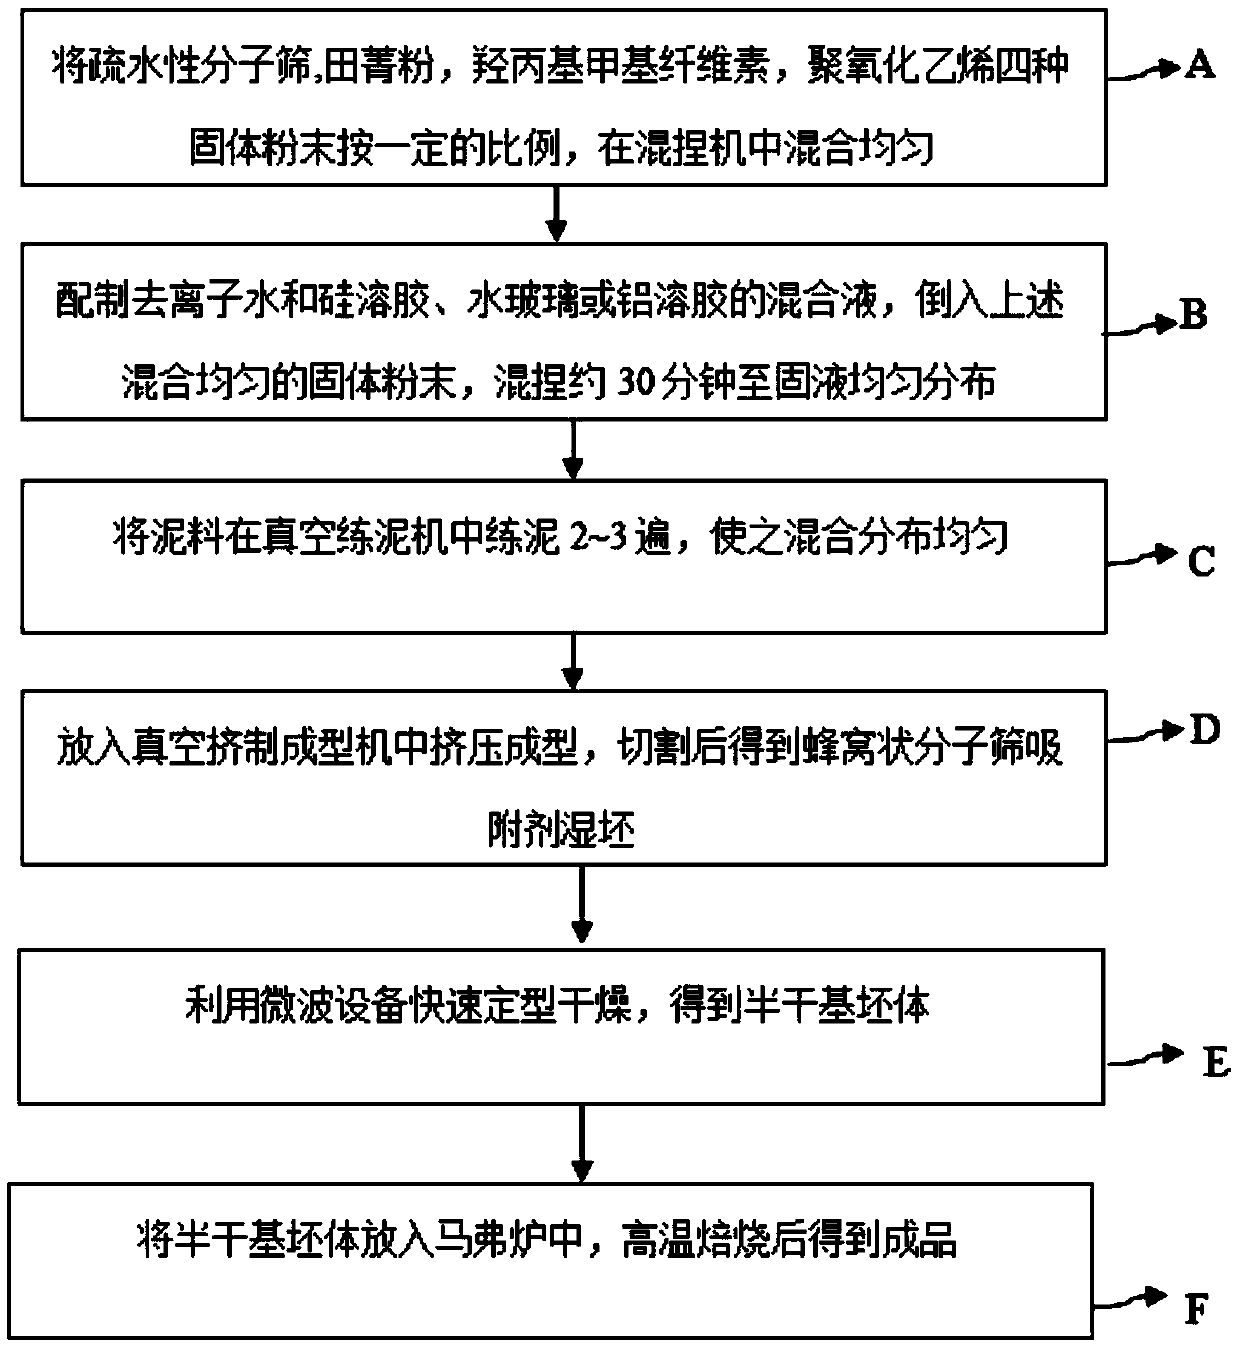 Honeycomb hydrophobic molecular sieve adsorbent as well as preparation method and application thereof